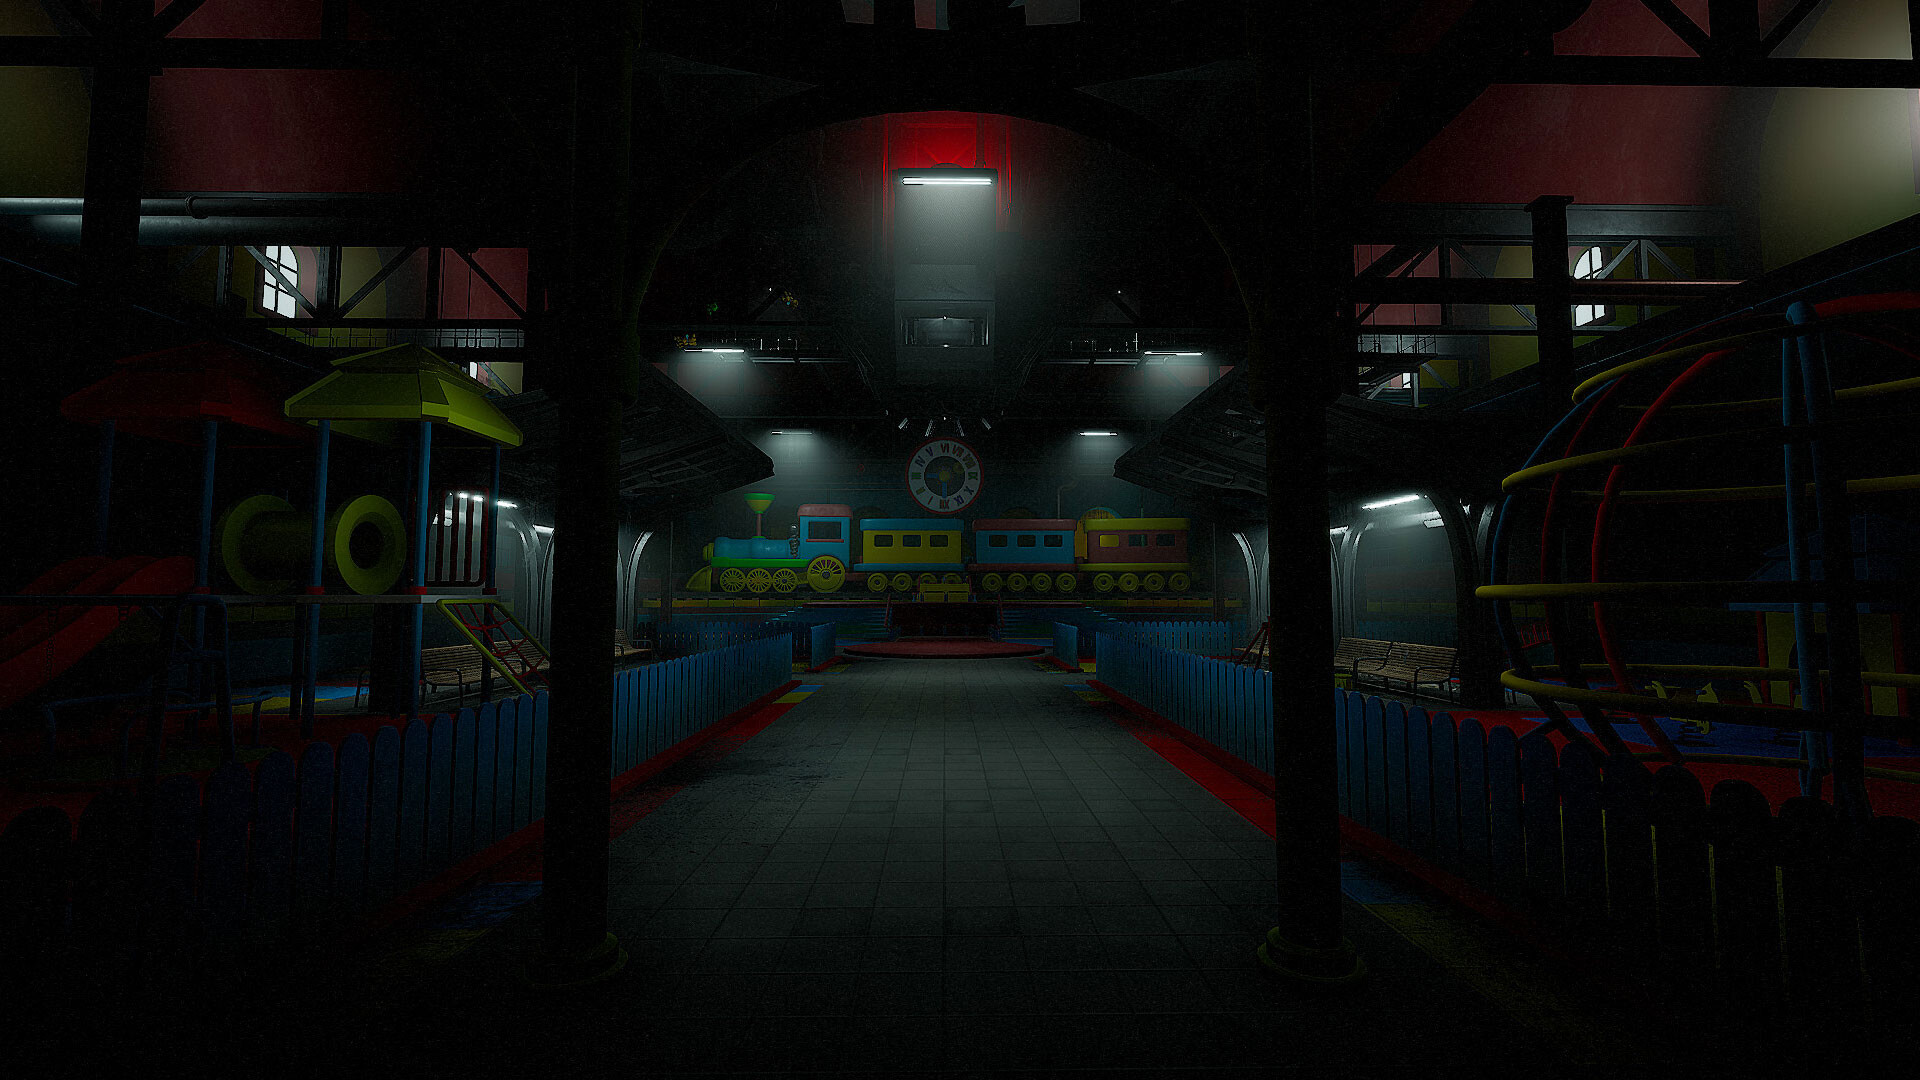 Poppy Playtime: Game station, Location, The code for the train, Used to escape the factory at the end of the chapter. 1920x1080 Full HD Wallpaper.